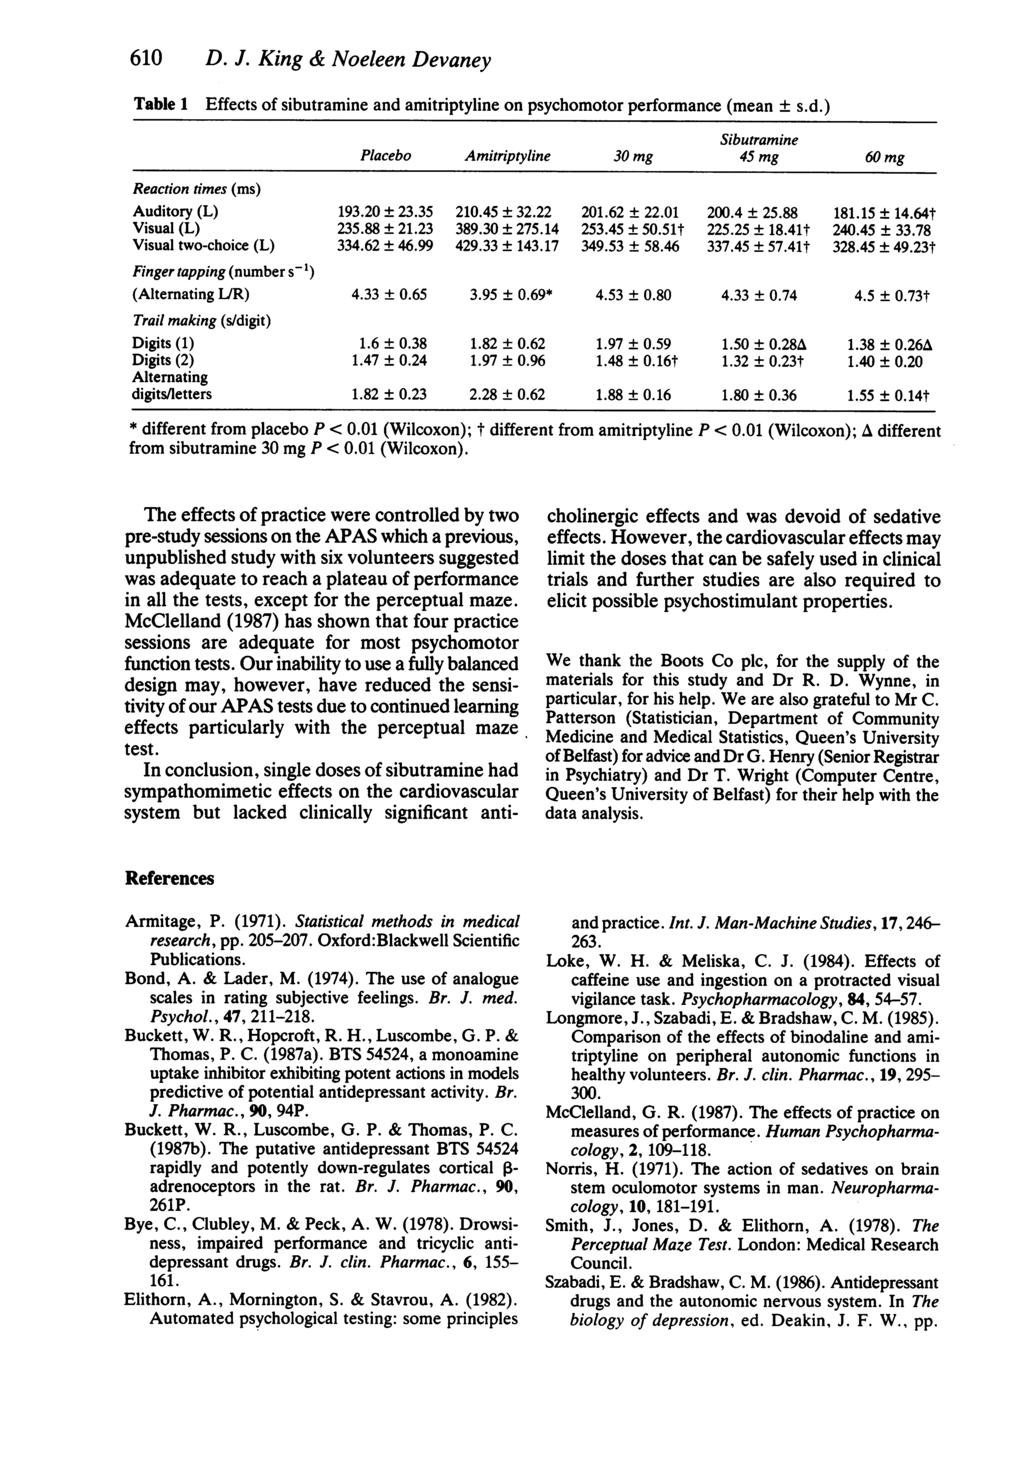 610 D. J. King & Noeleen Devaney Table 1 Effects of sibutramine and amitriptyline on psychomotor performance (mean ± s.d.) Sibutramine Placebo Amitriptyline 30 mg 45 mg 60 mg Reaction times (ms) Auditory (L) 193.